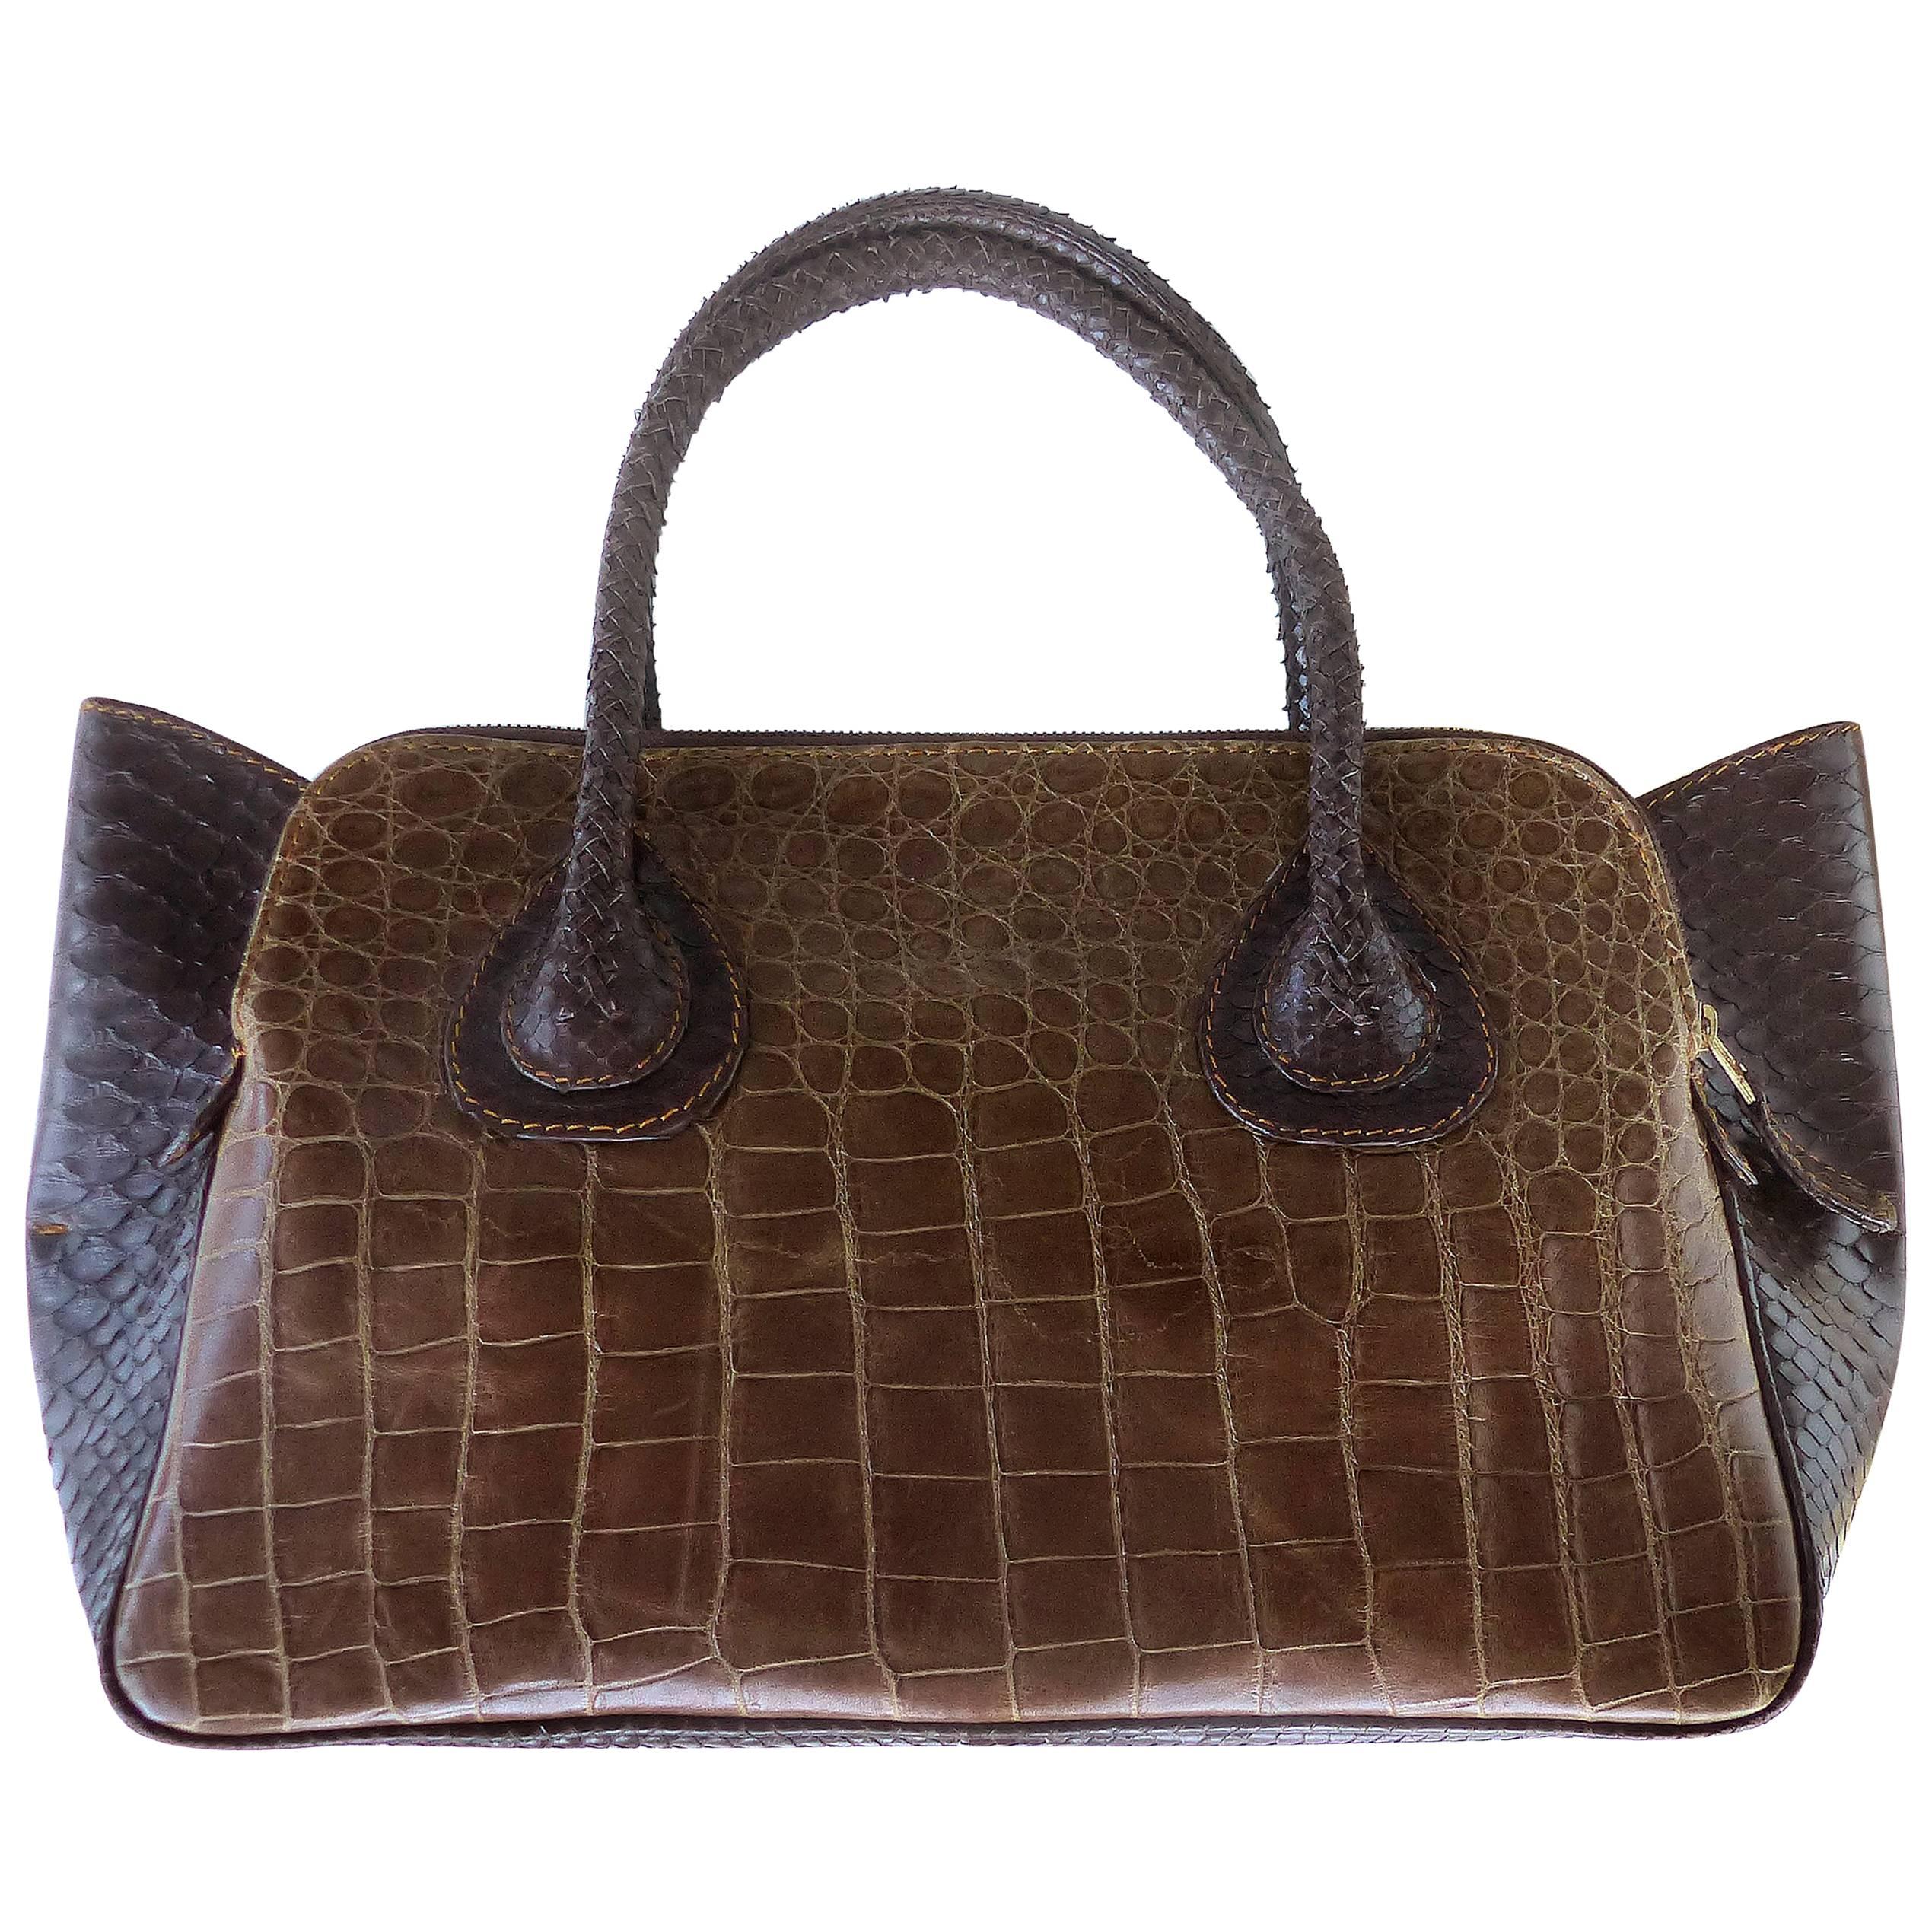 "It" Bag in Tobacco Salt Water Crocodile and Rubberized Python by Glen Arthur For Sale